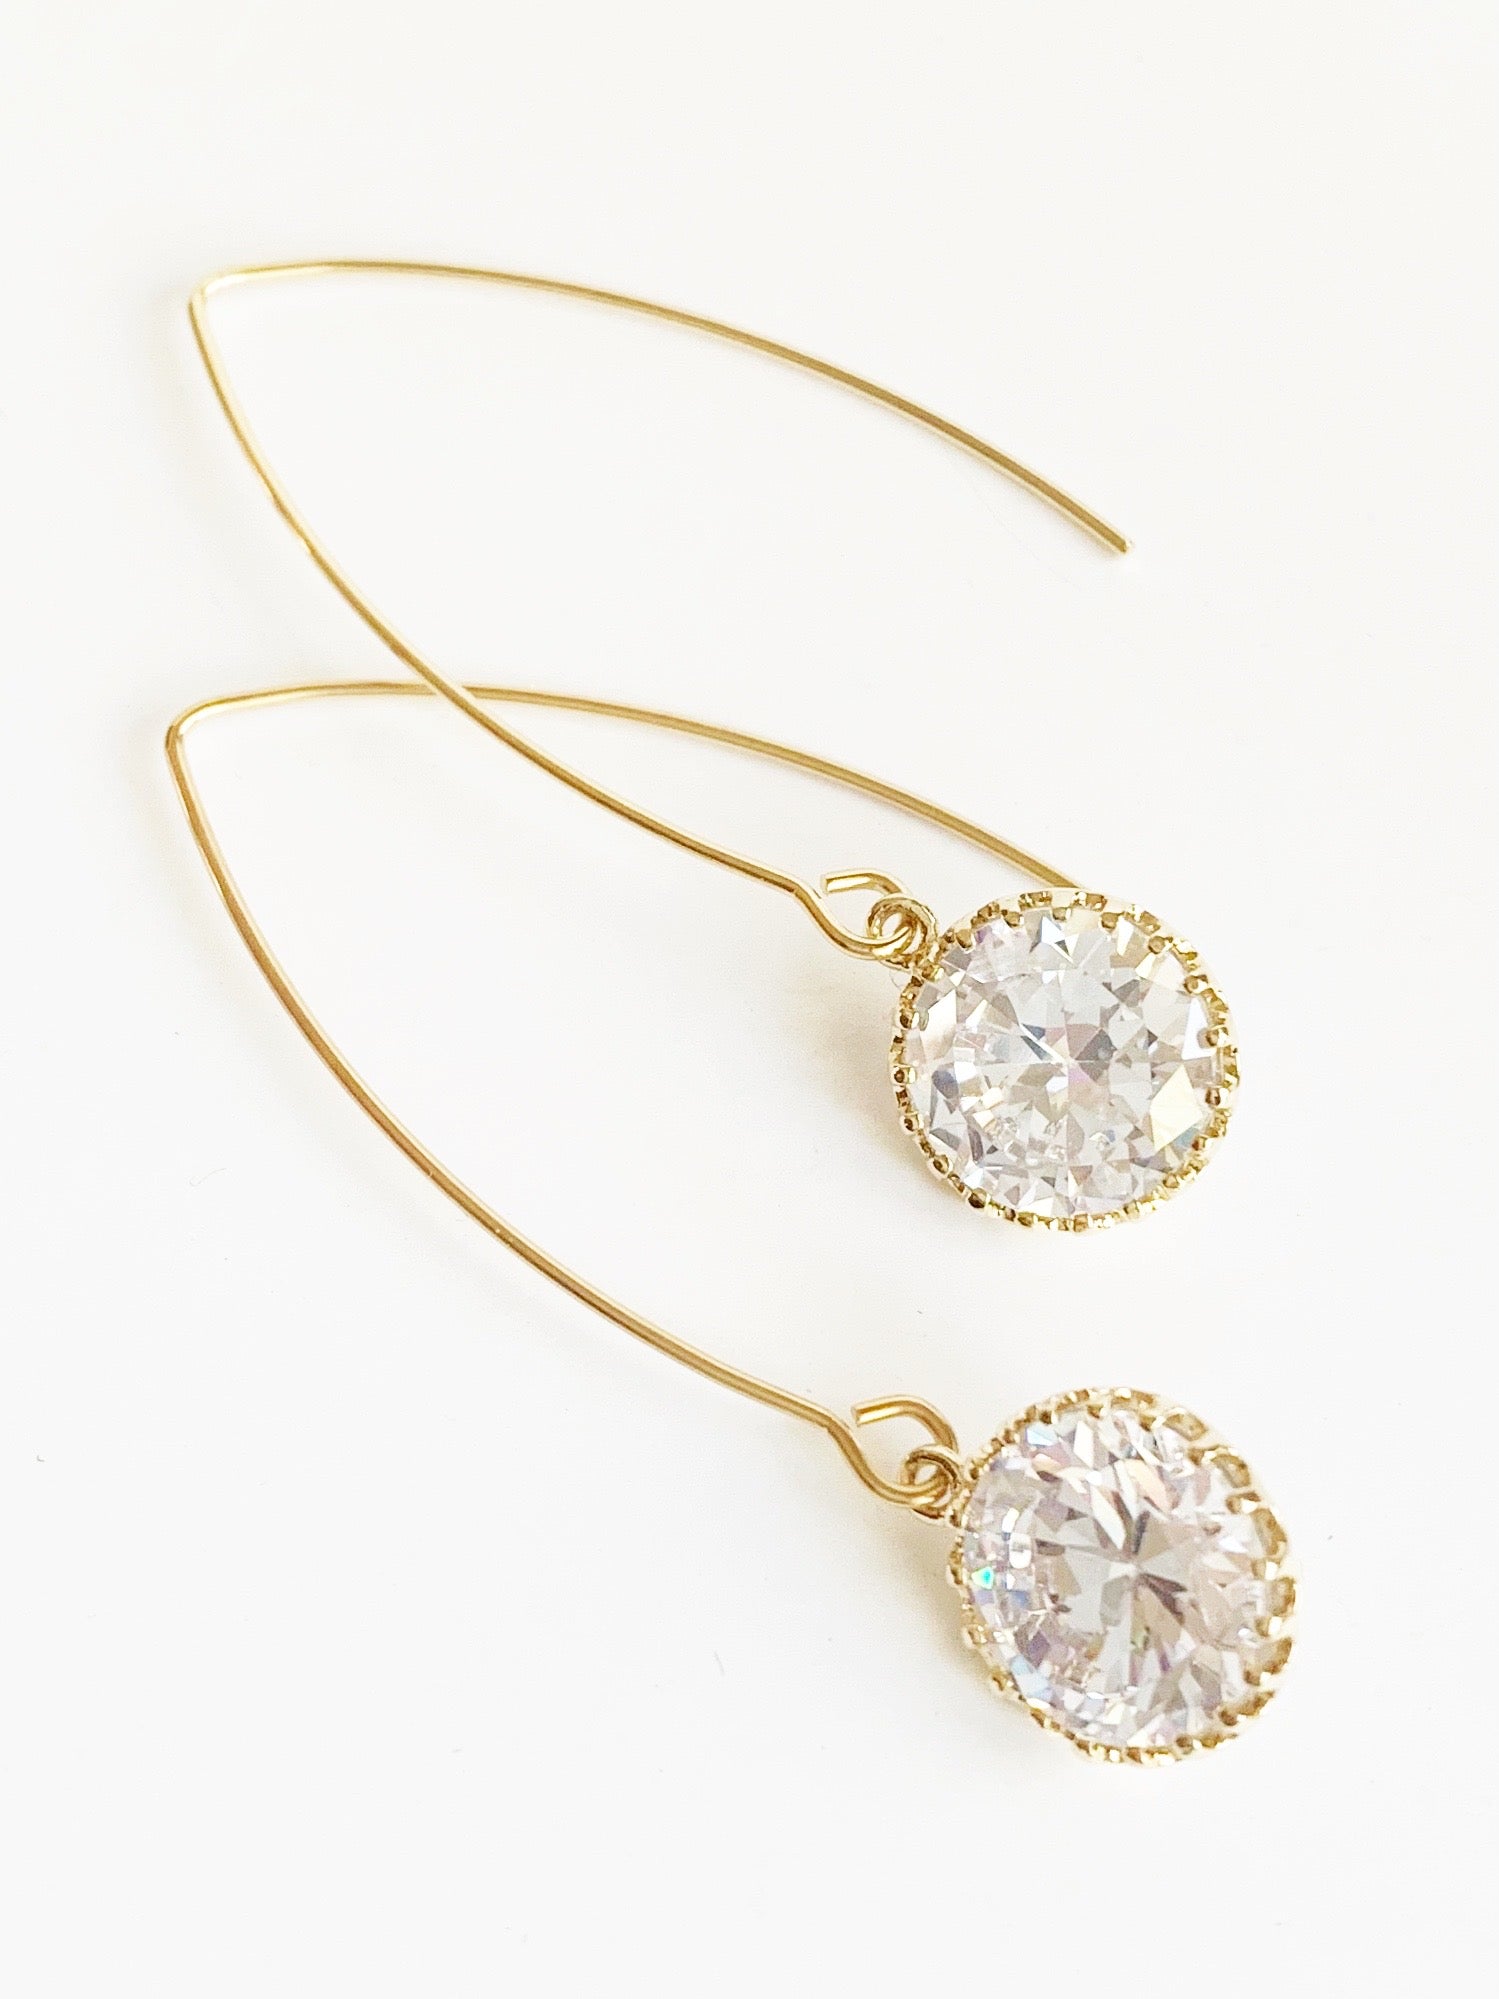 gold threader earrings with crystals